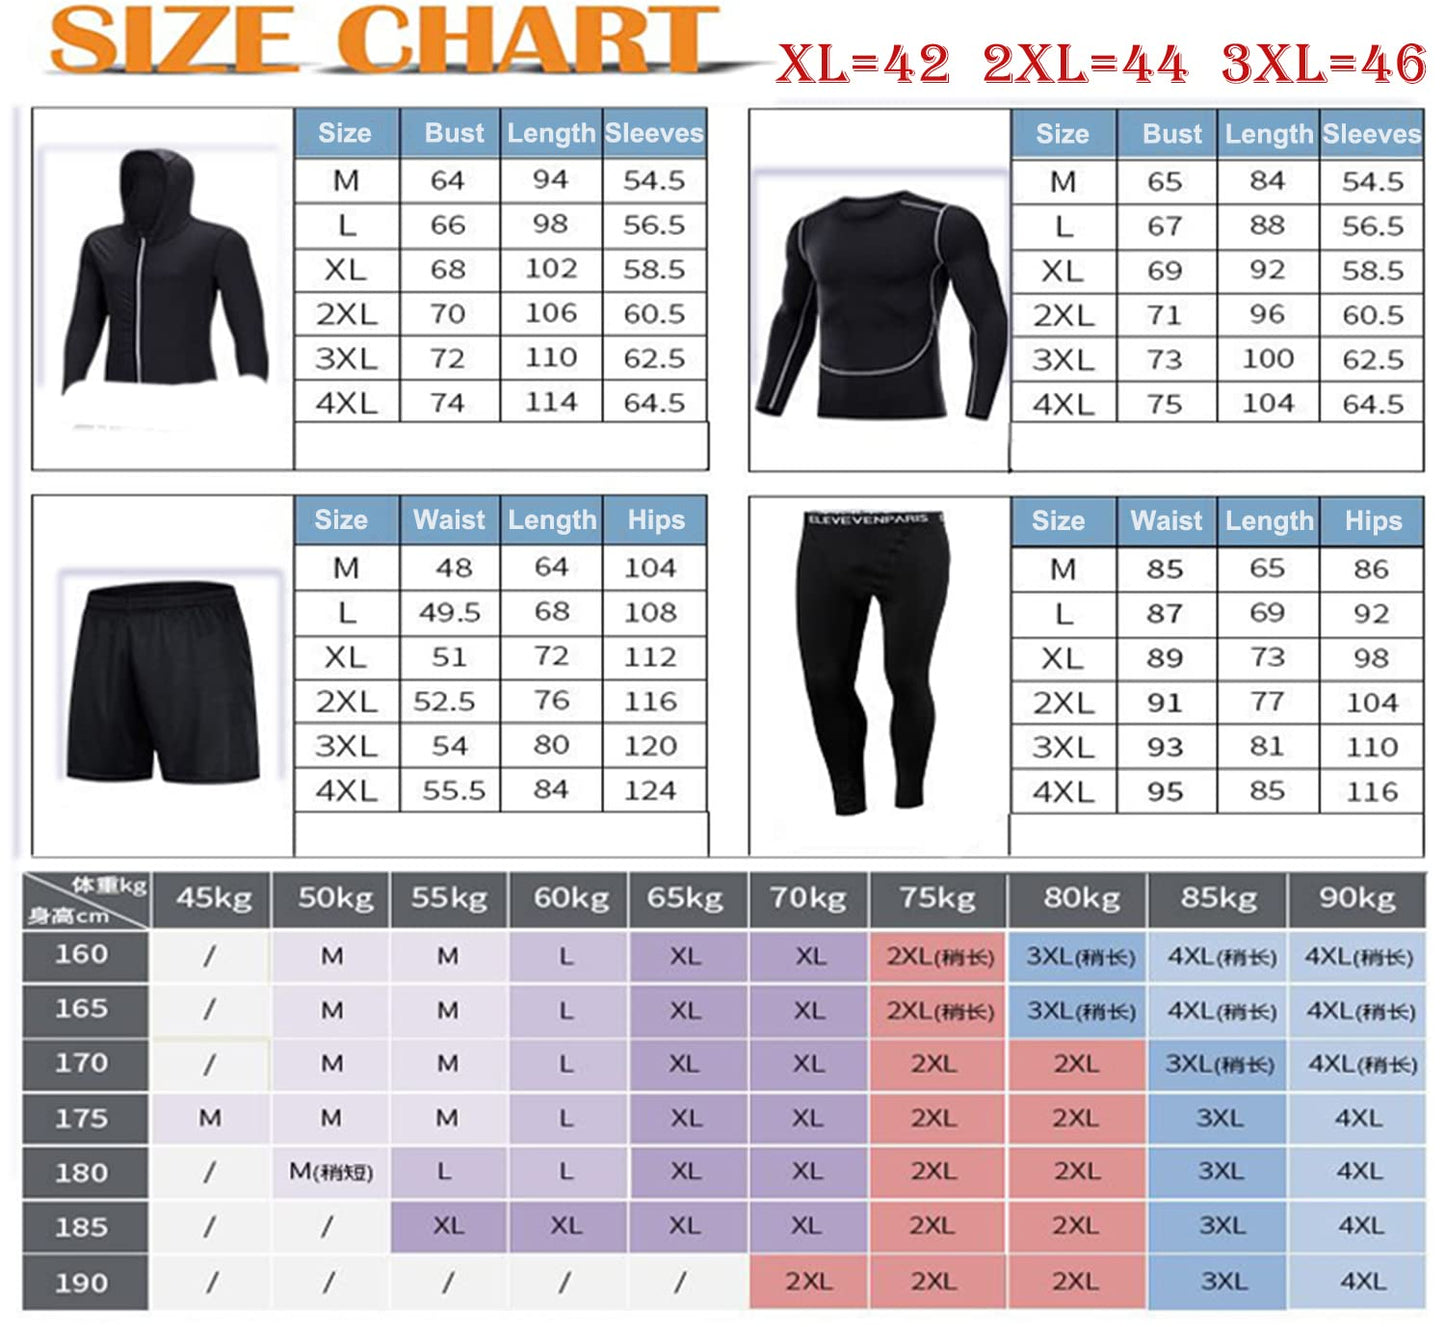 Moonmen 5 Pcs/Set Men's Tracksuit Compression Sports Suit Gym Fitness Clothes Running Jogging Sport Wear Training Workout Tights